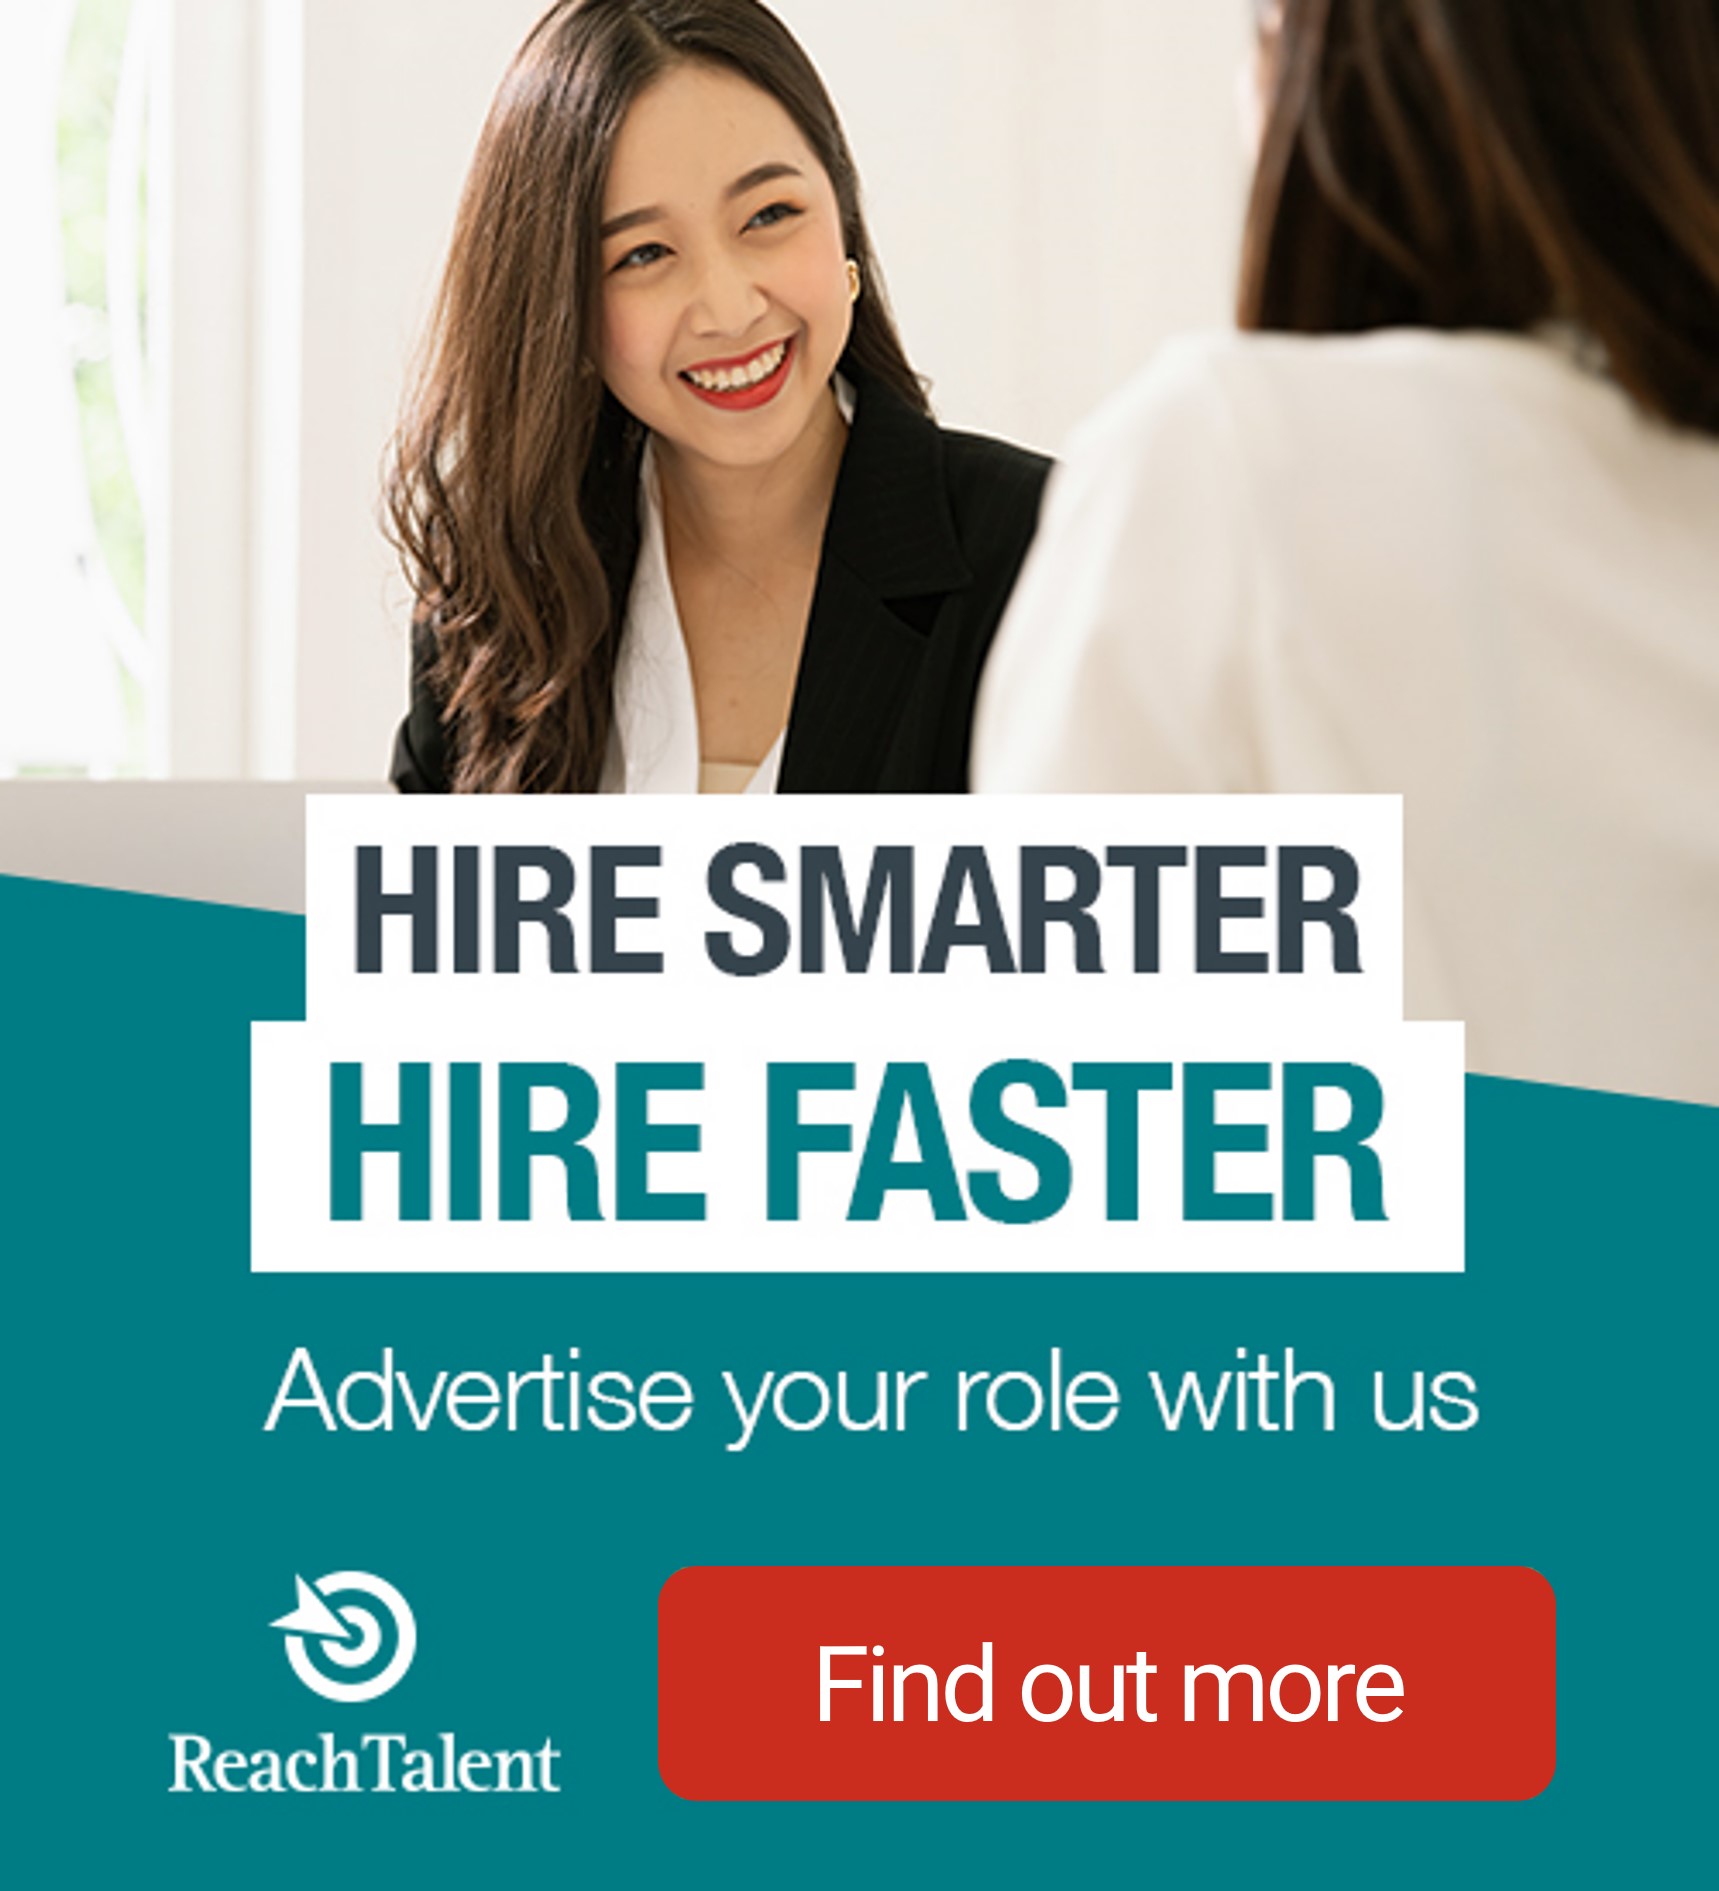 Advertise Your Role With ReachTalent